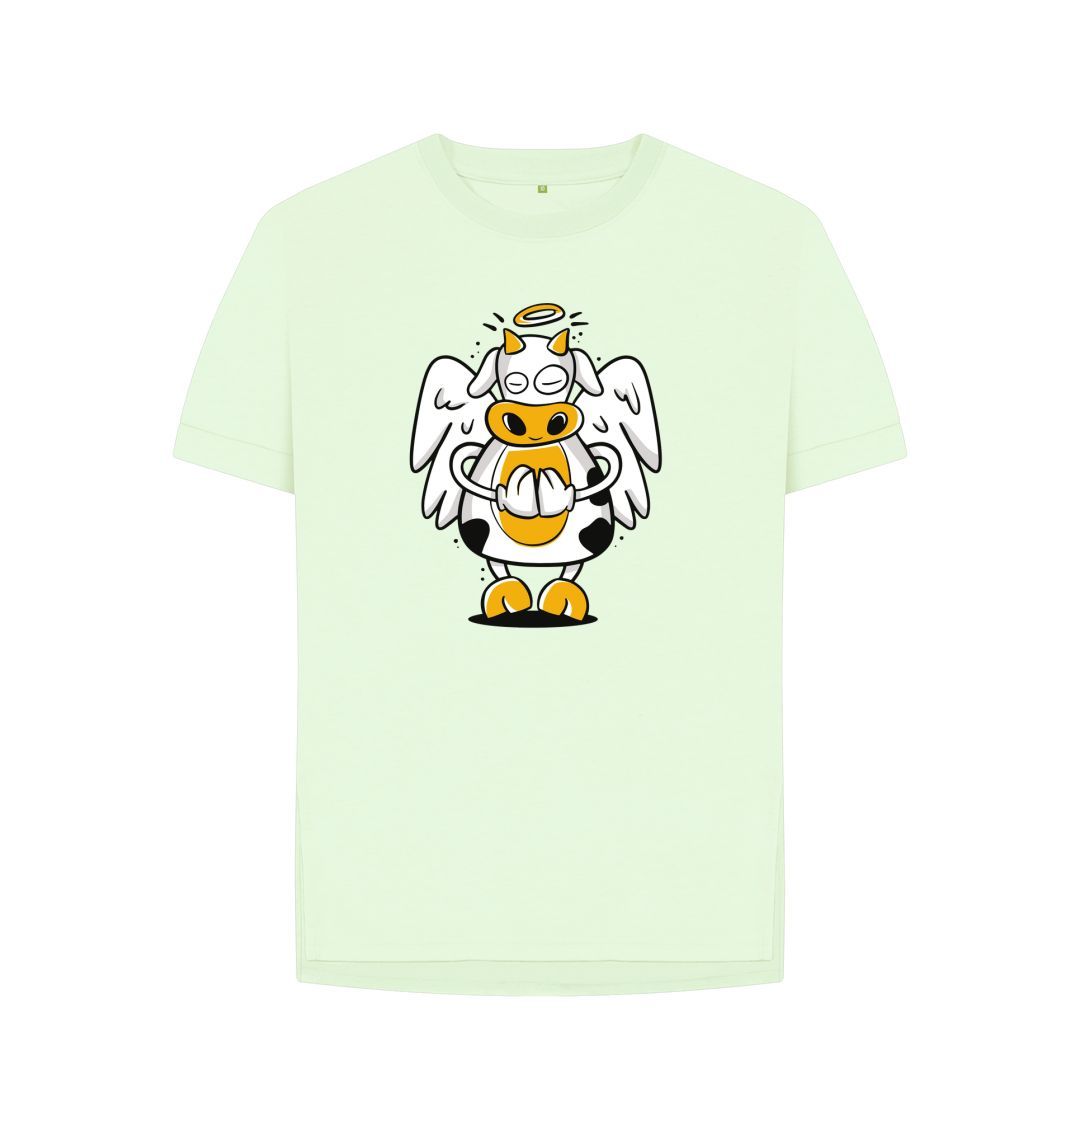 Pastel Green Angelic Cow Women's Relaxed Fit Tee